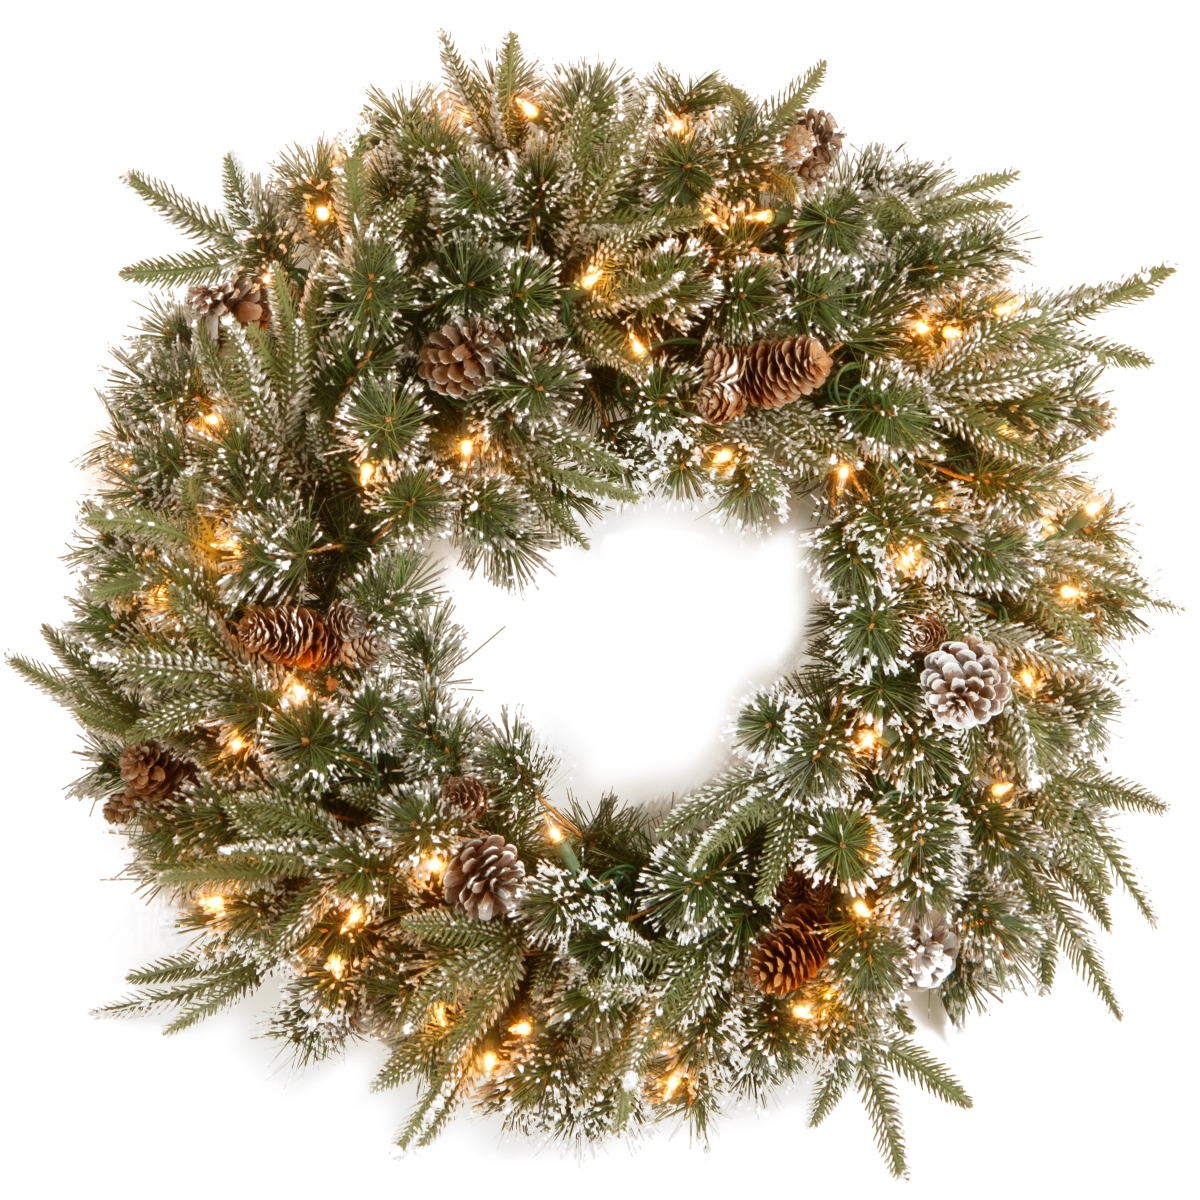 24 In. Feel Real Liberty Pine Wreath With Snow & Pine Cones & 50 Clear Lights